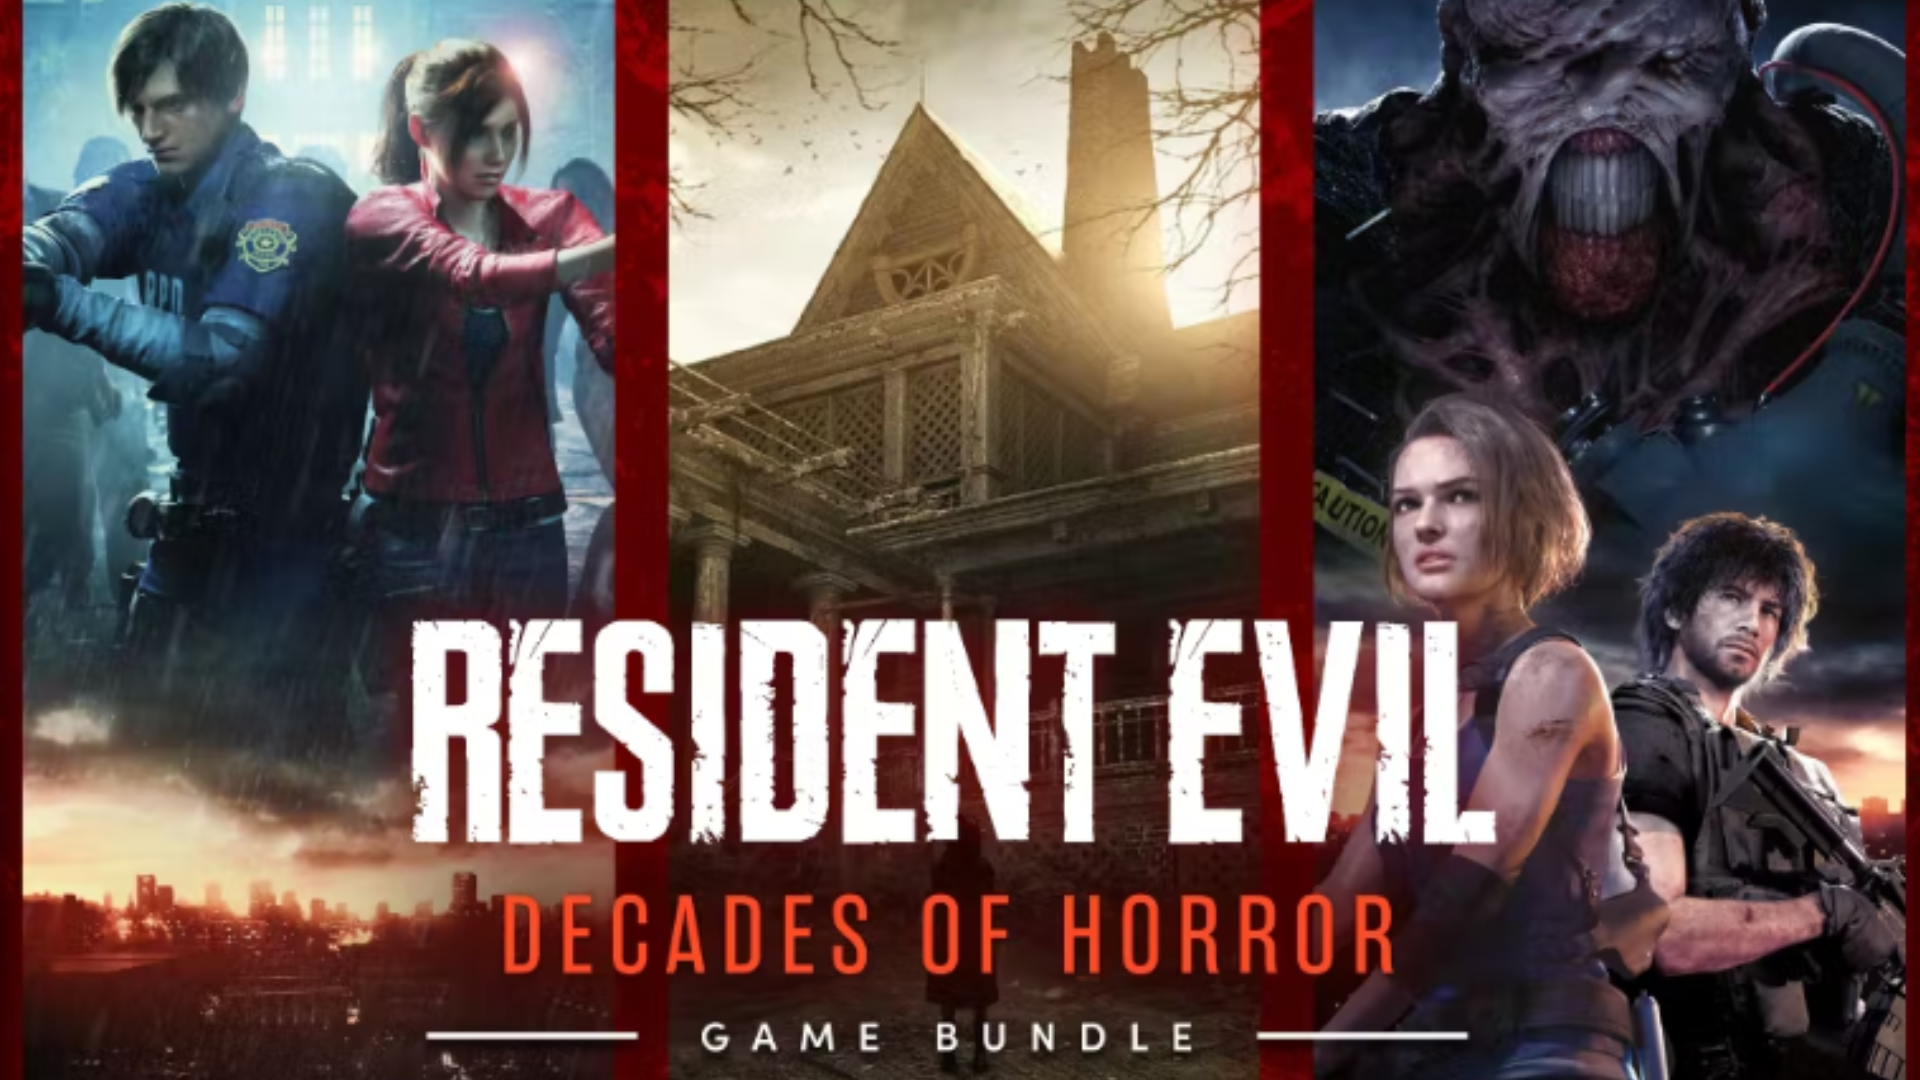 Image for Resident Evil Decades of Horror Bundle is available now at Humble